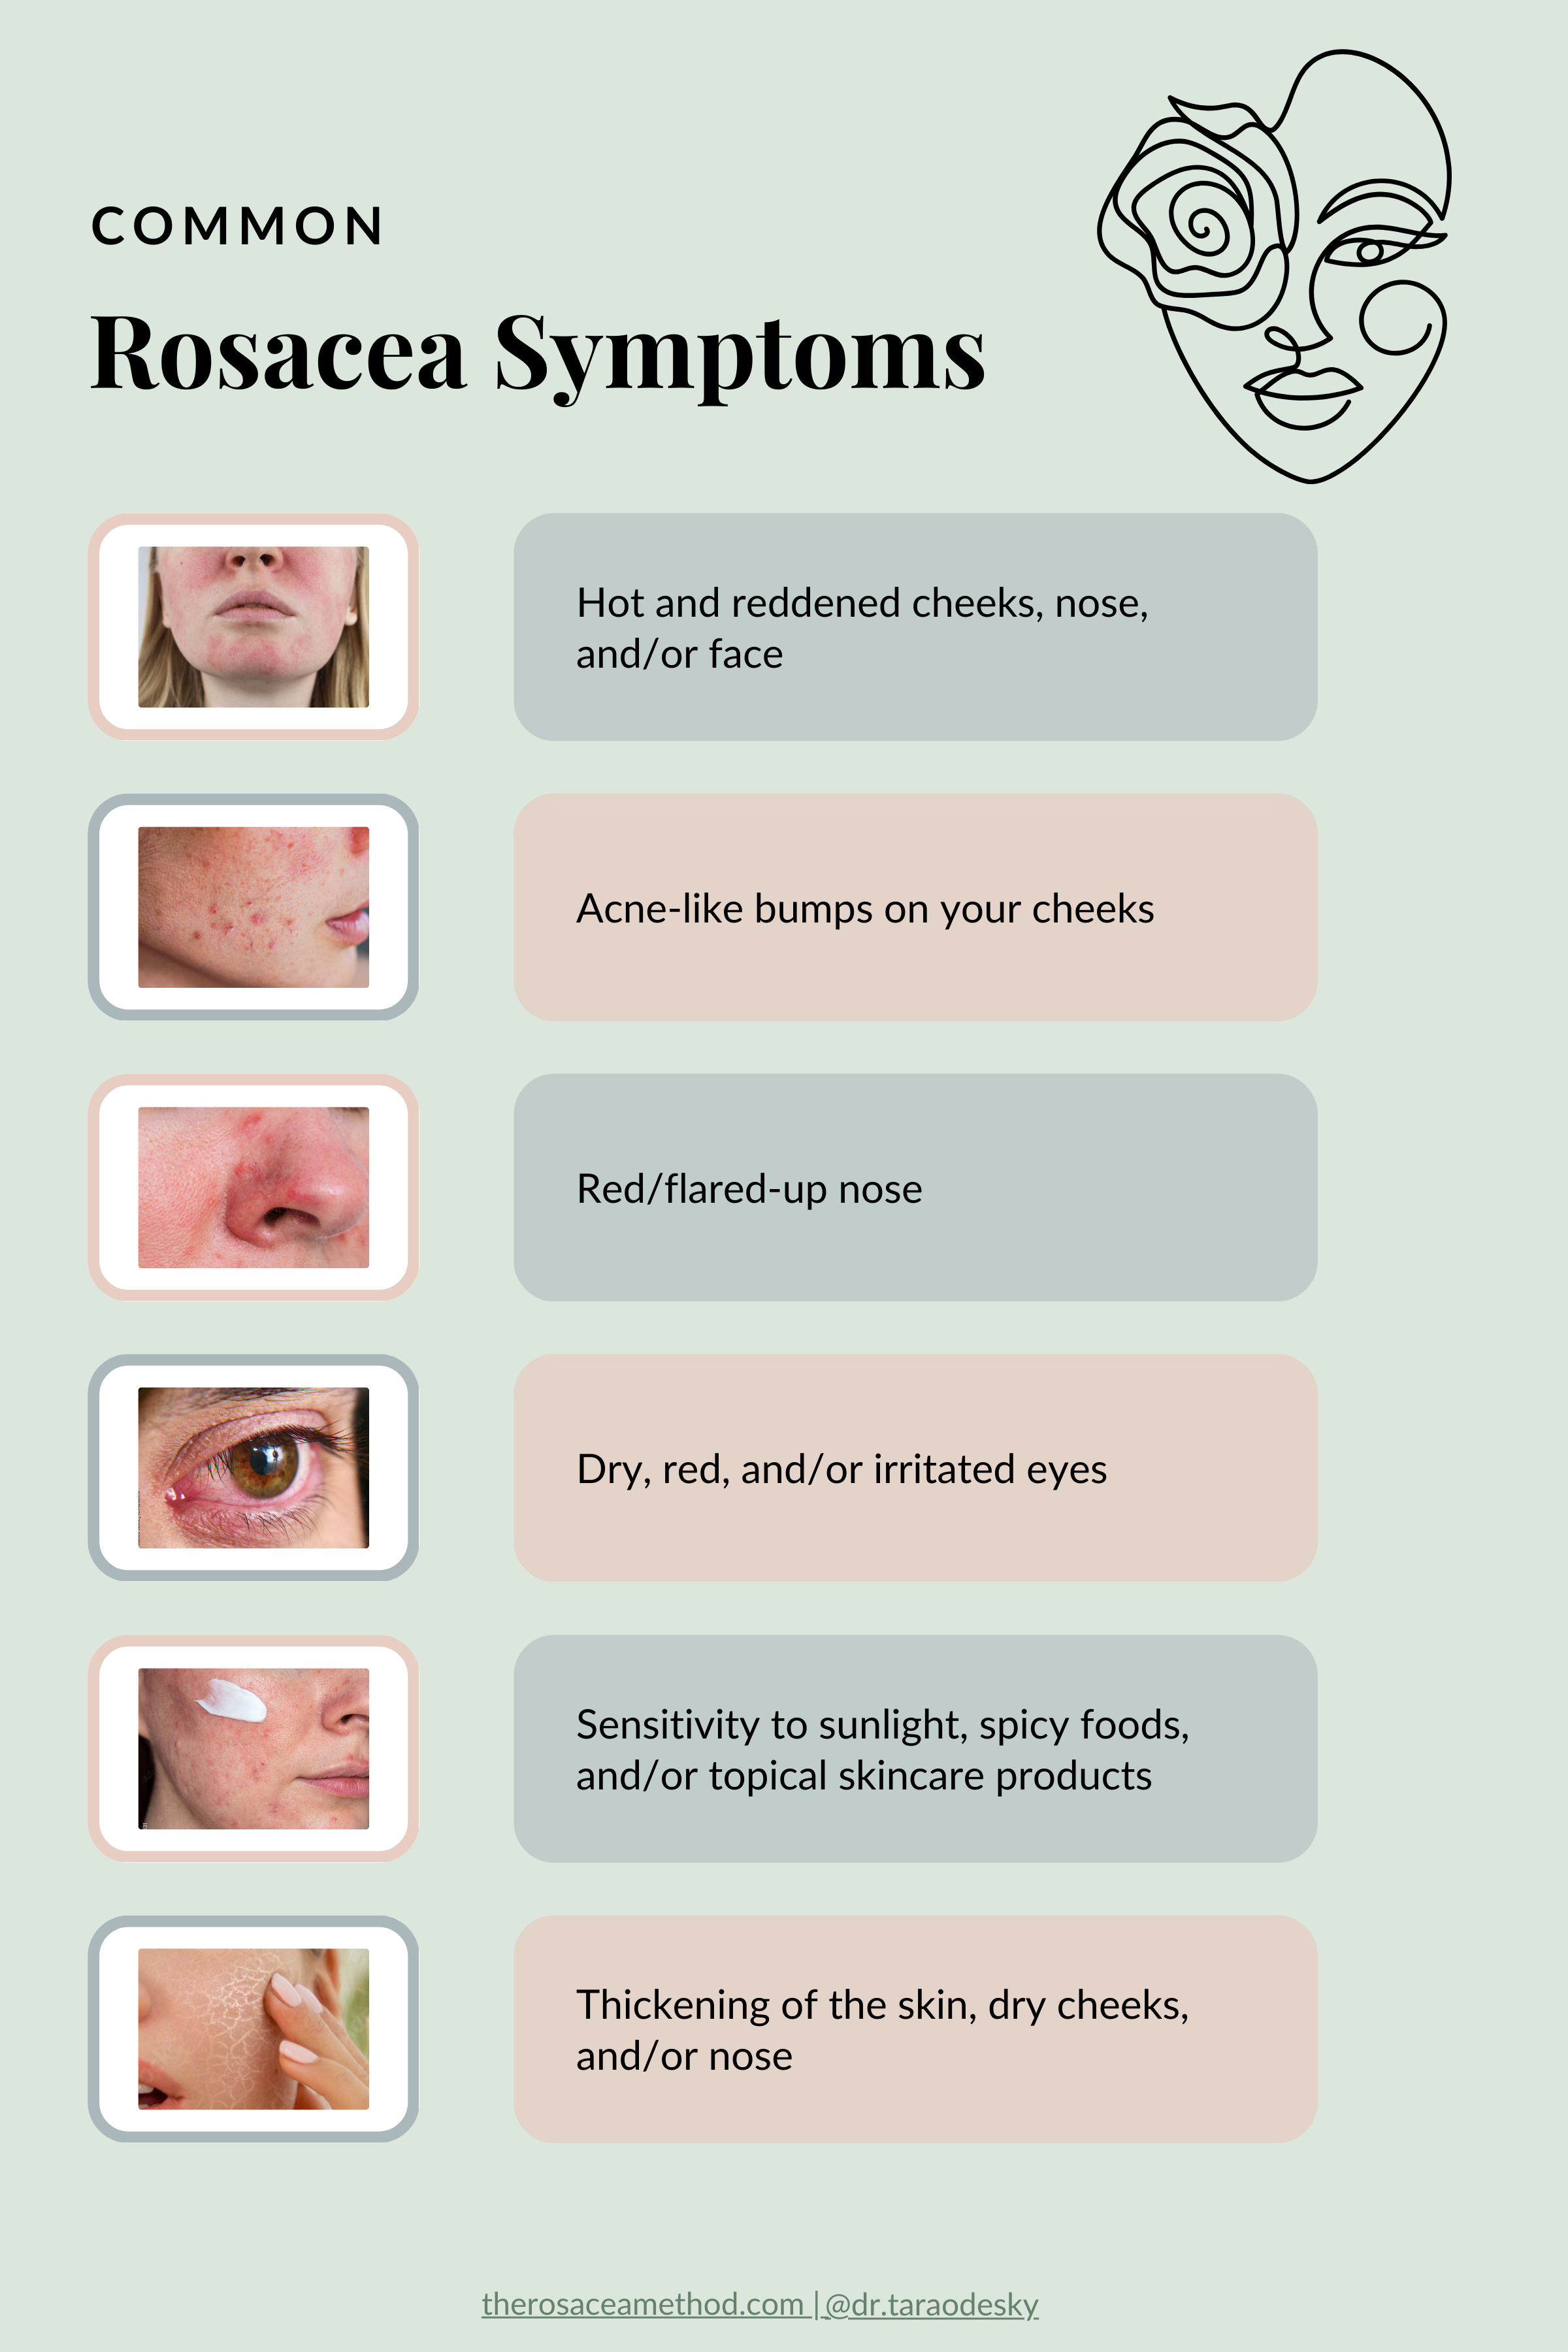 Rosacea triggers can these most common symptoms.